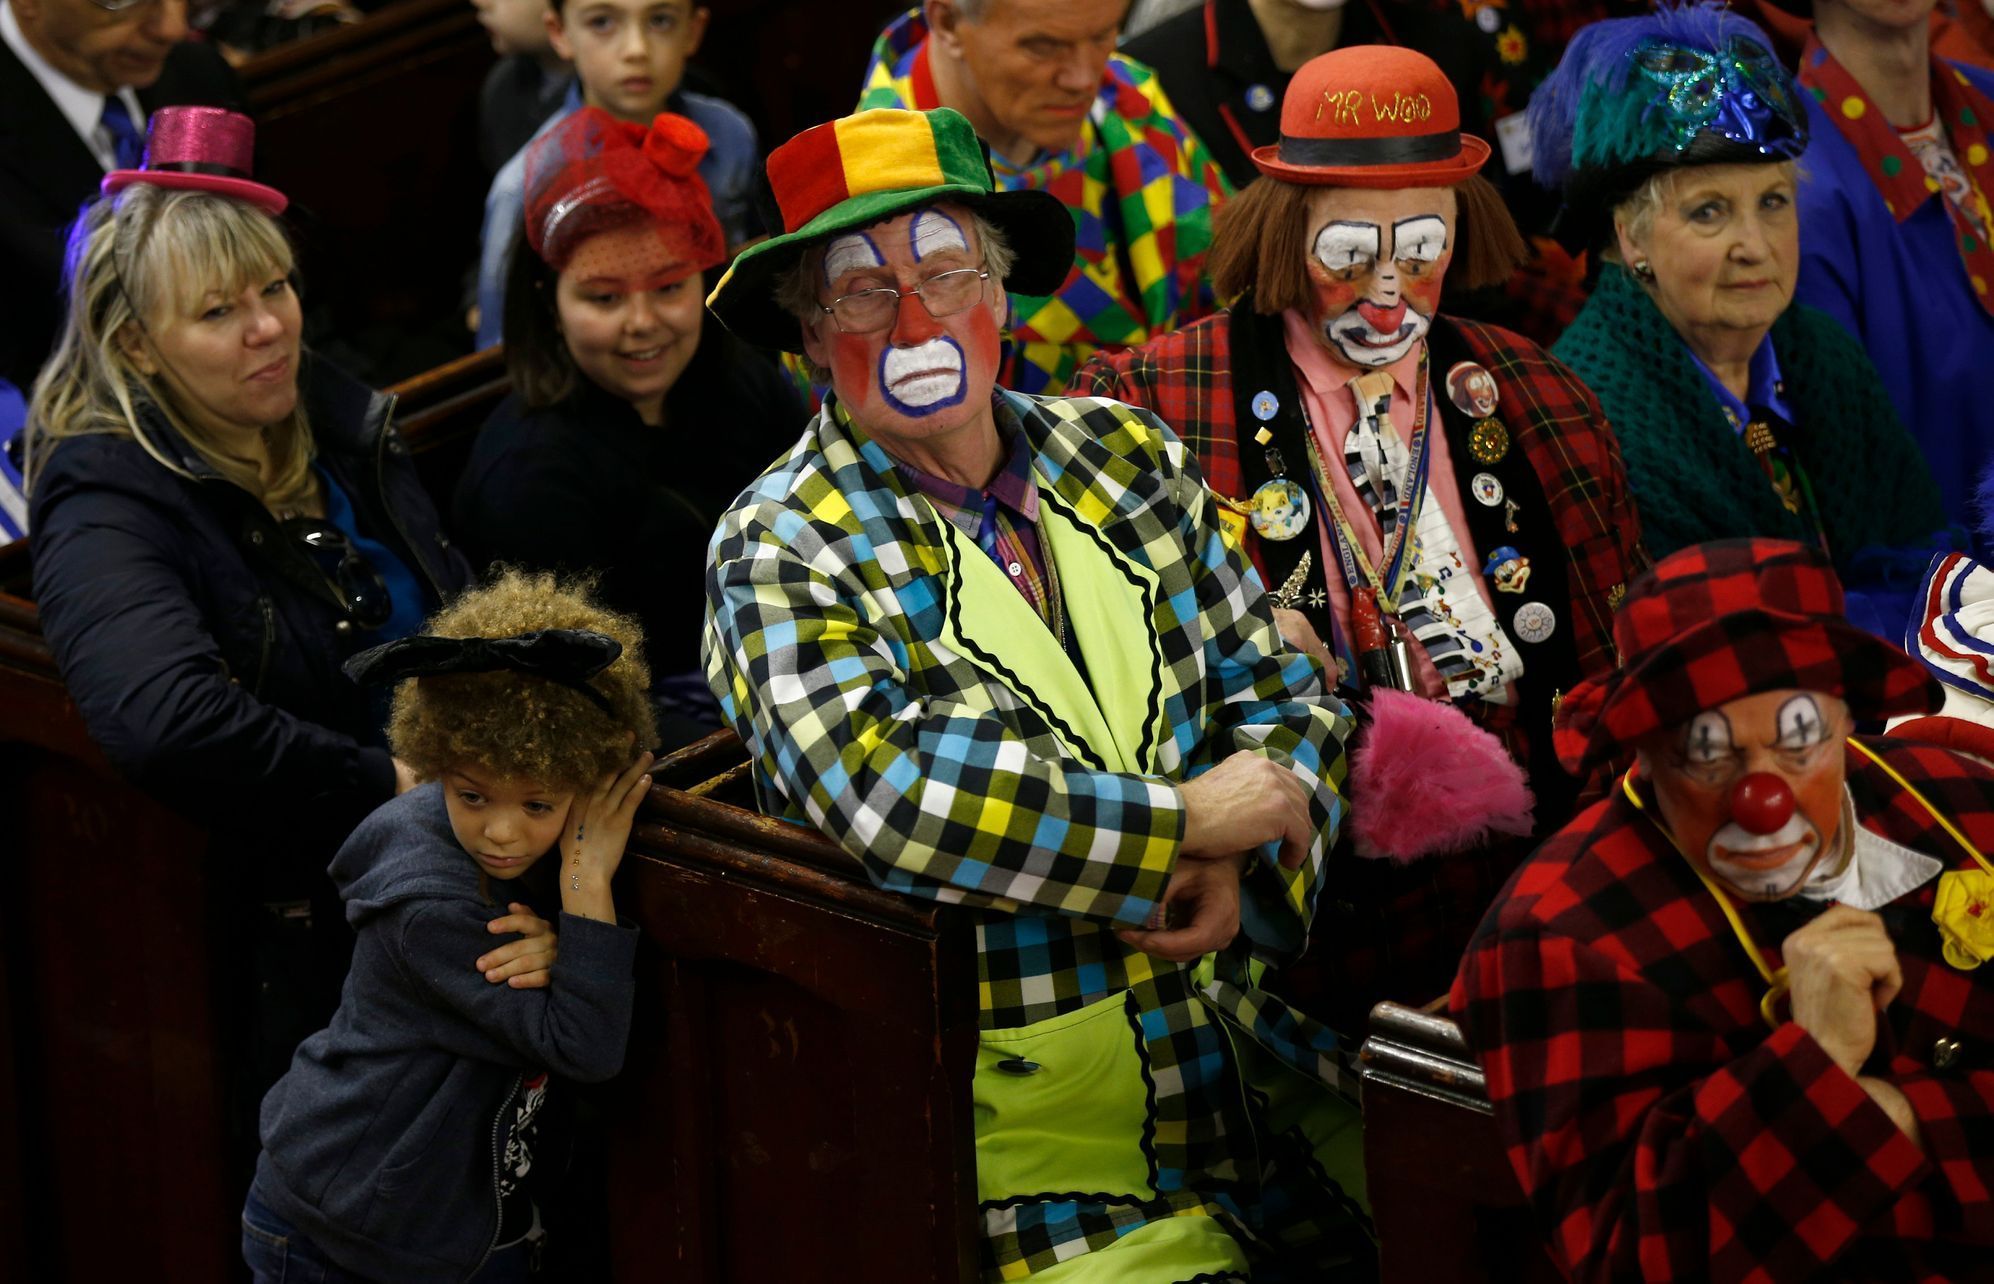 Clowns and members of the public sit in the pews of the All Saints Church during the Grimaldi clown service in Dalston, north London